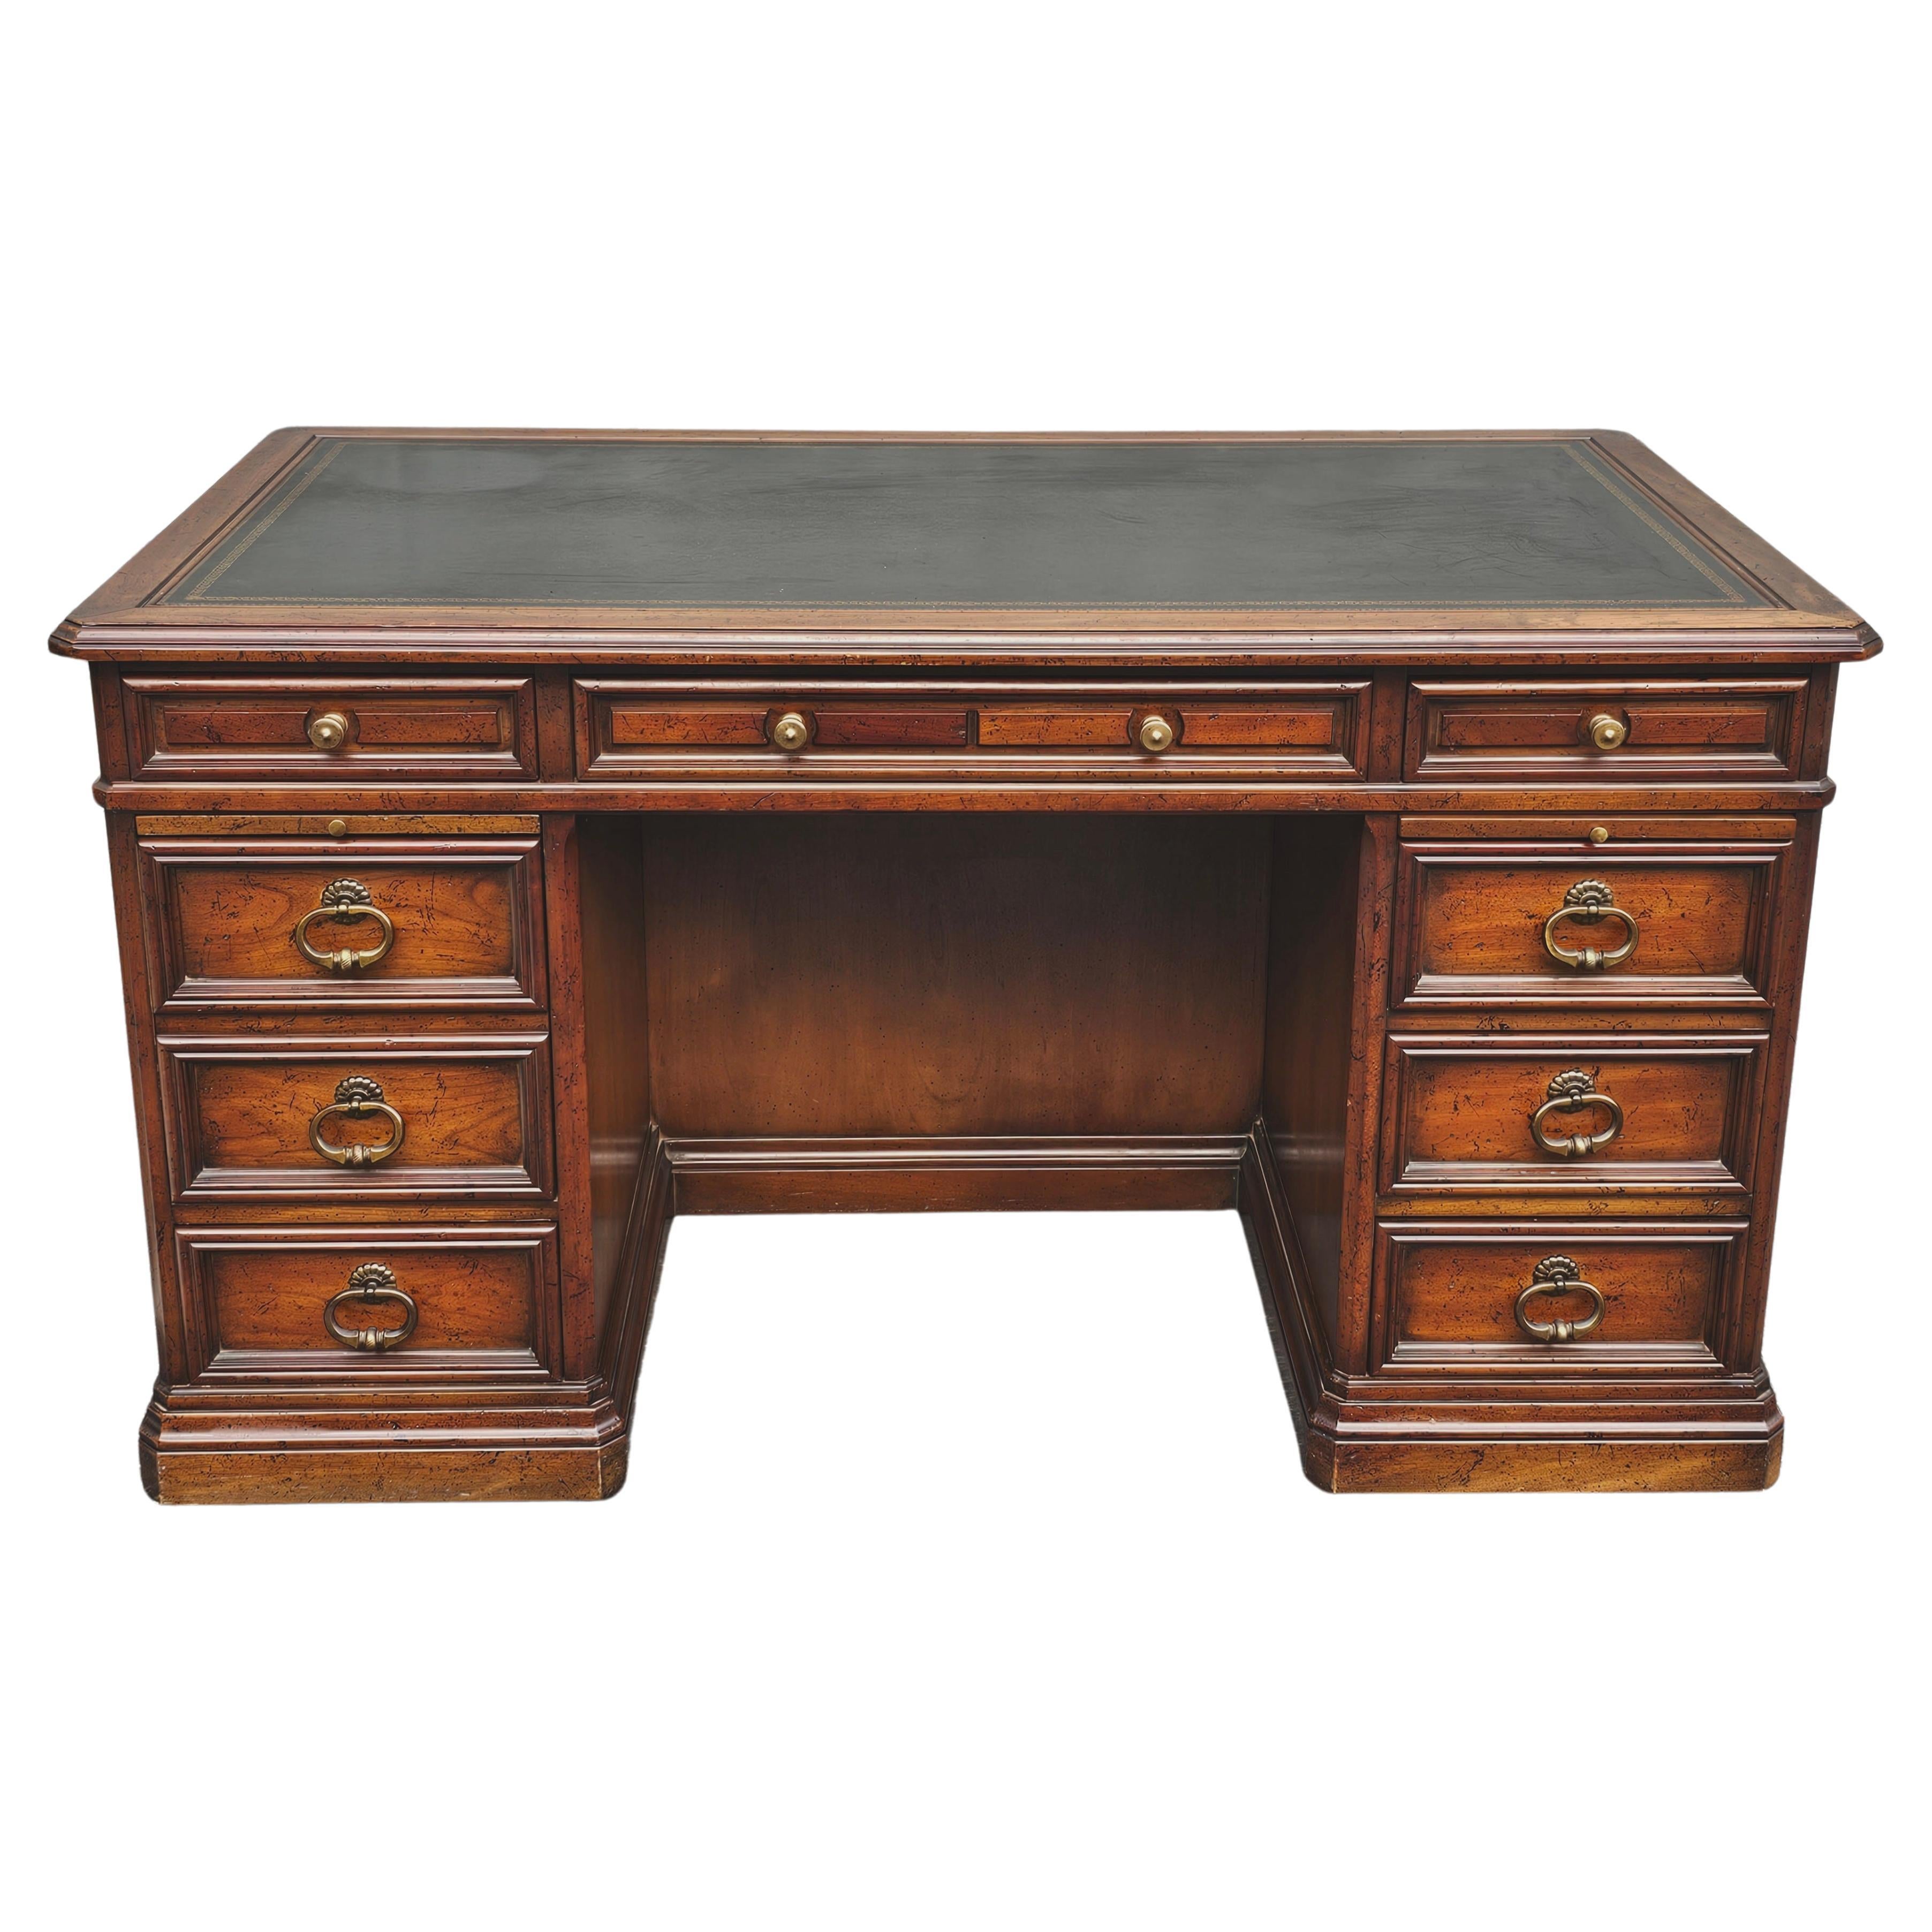 1965 Sligh Lowry Distressed Walnut and Tooled Leather Executive Desk Bookcase For Sale 1